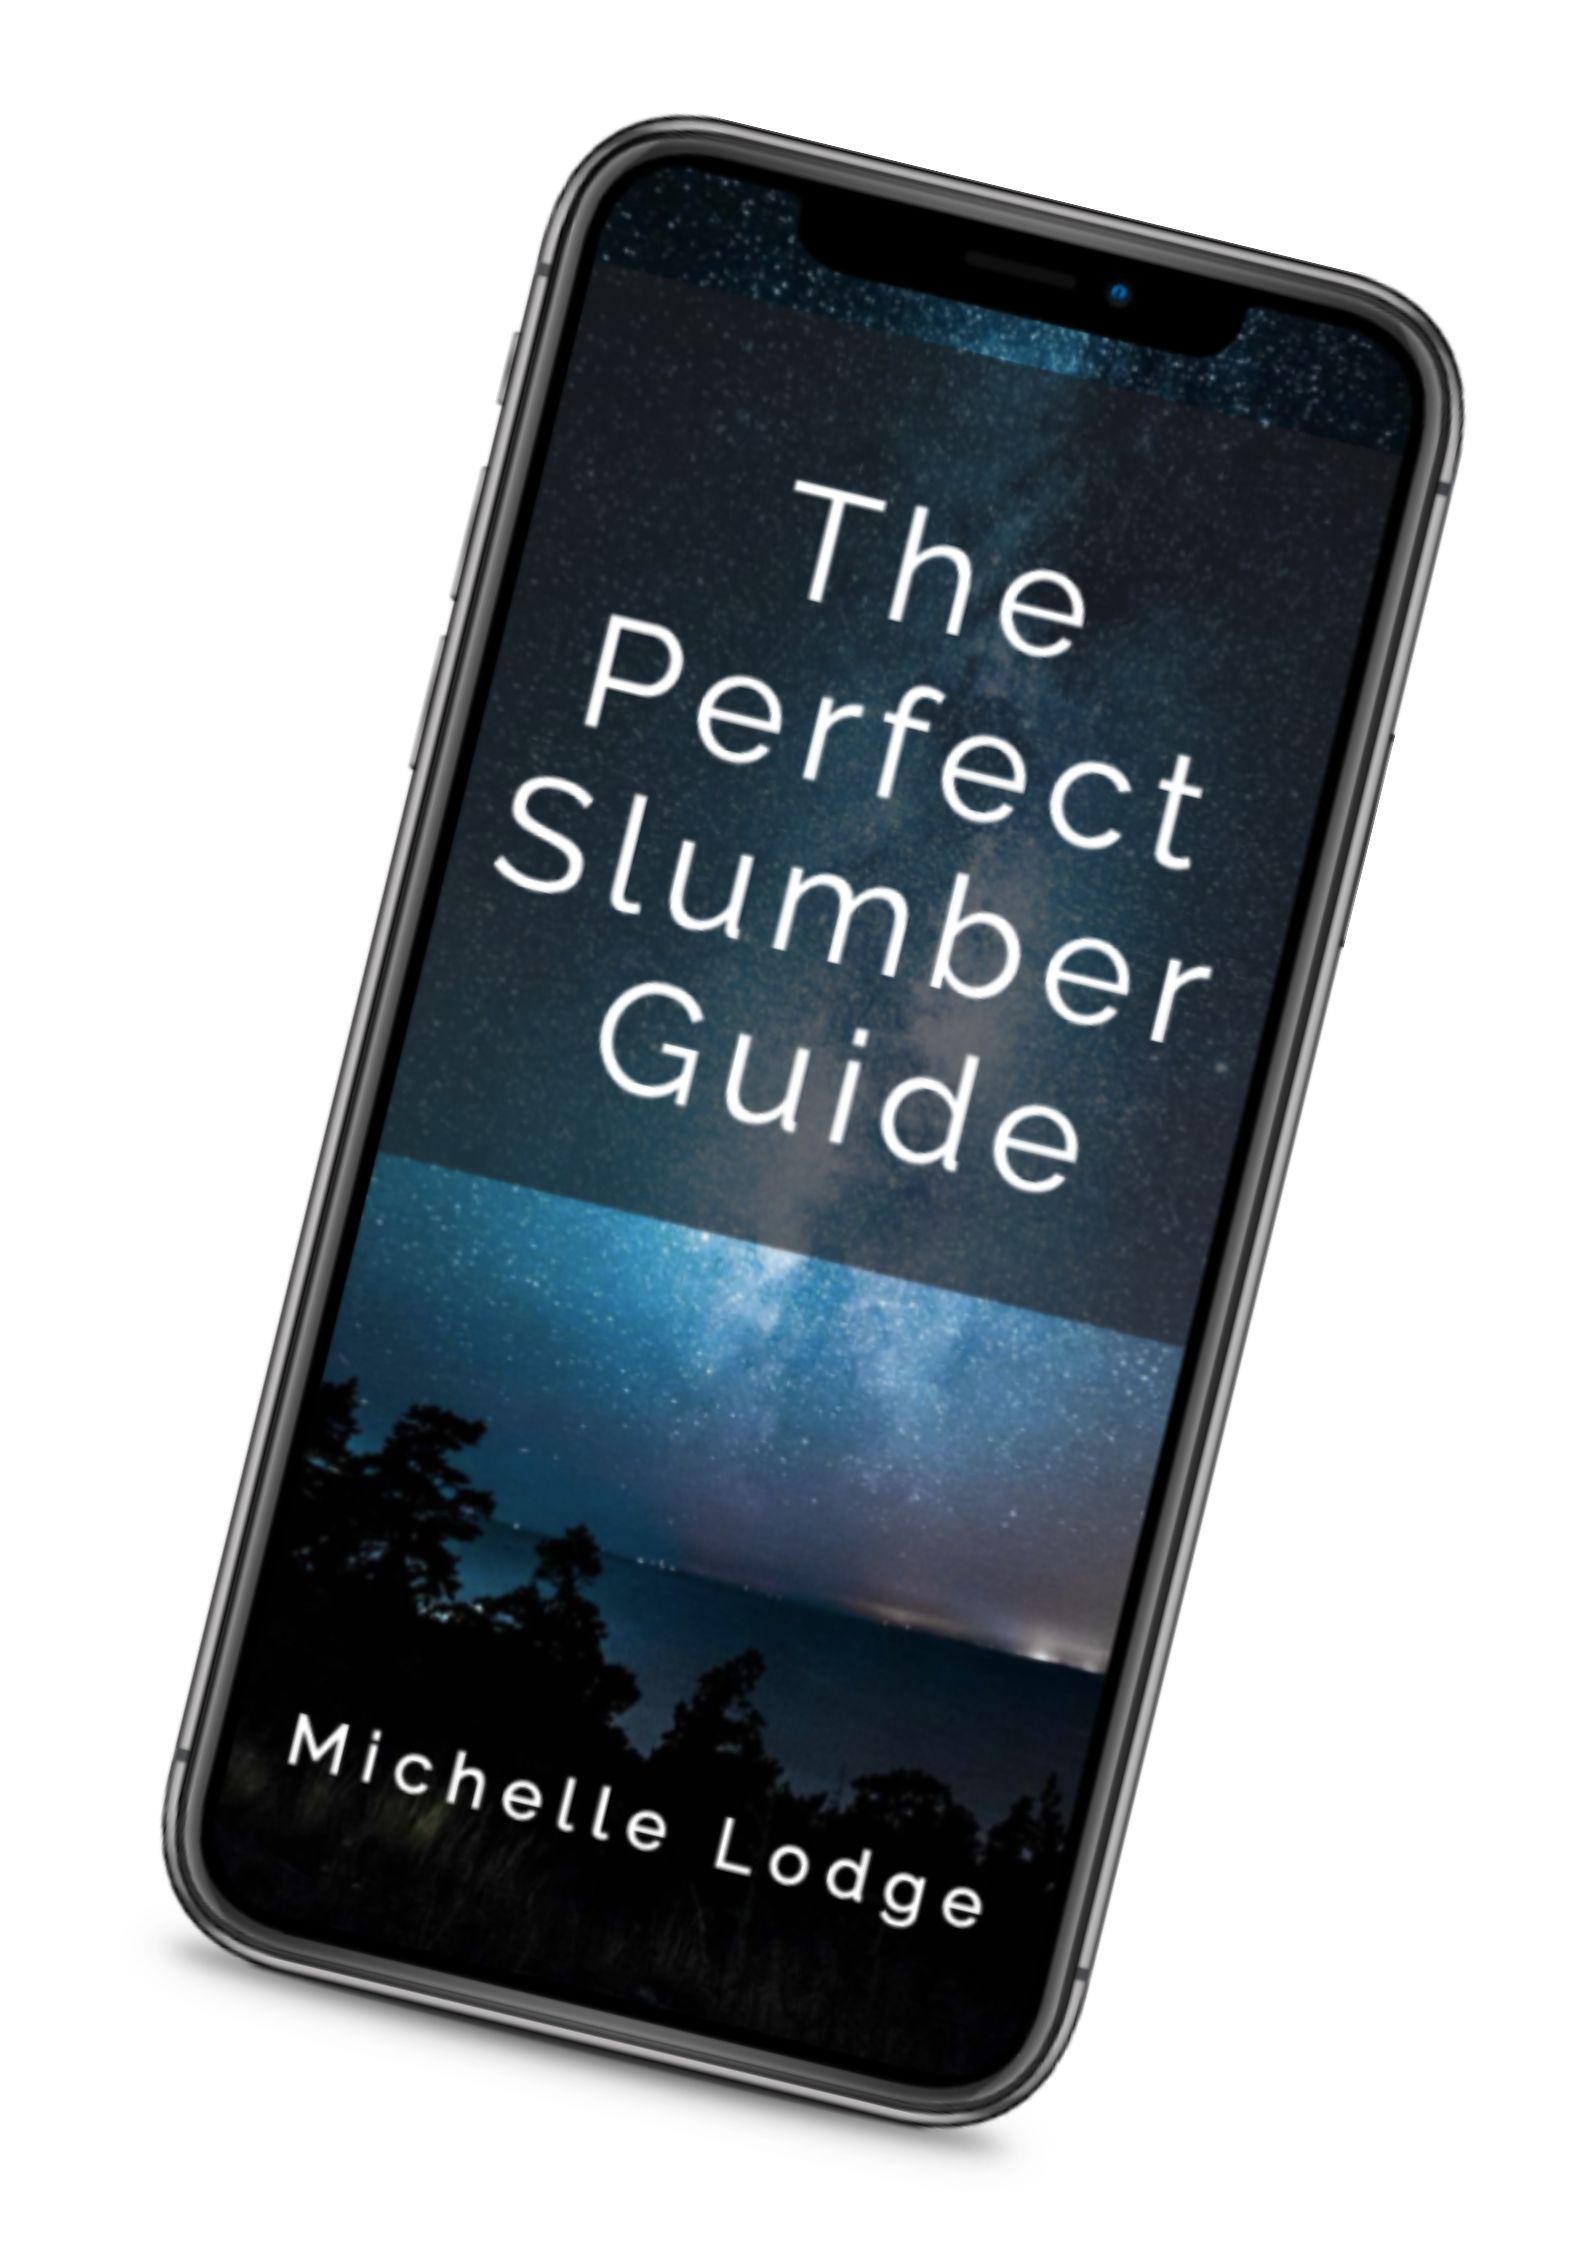 Slumber guide and free checklist by Michelle Lodge